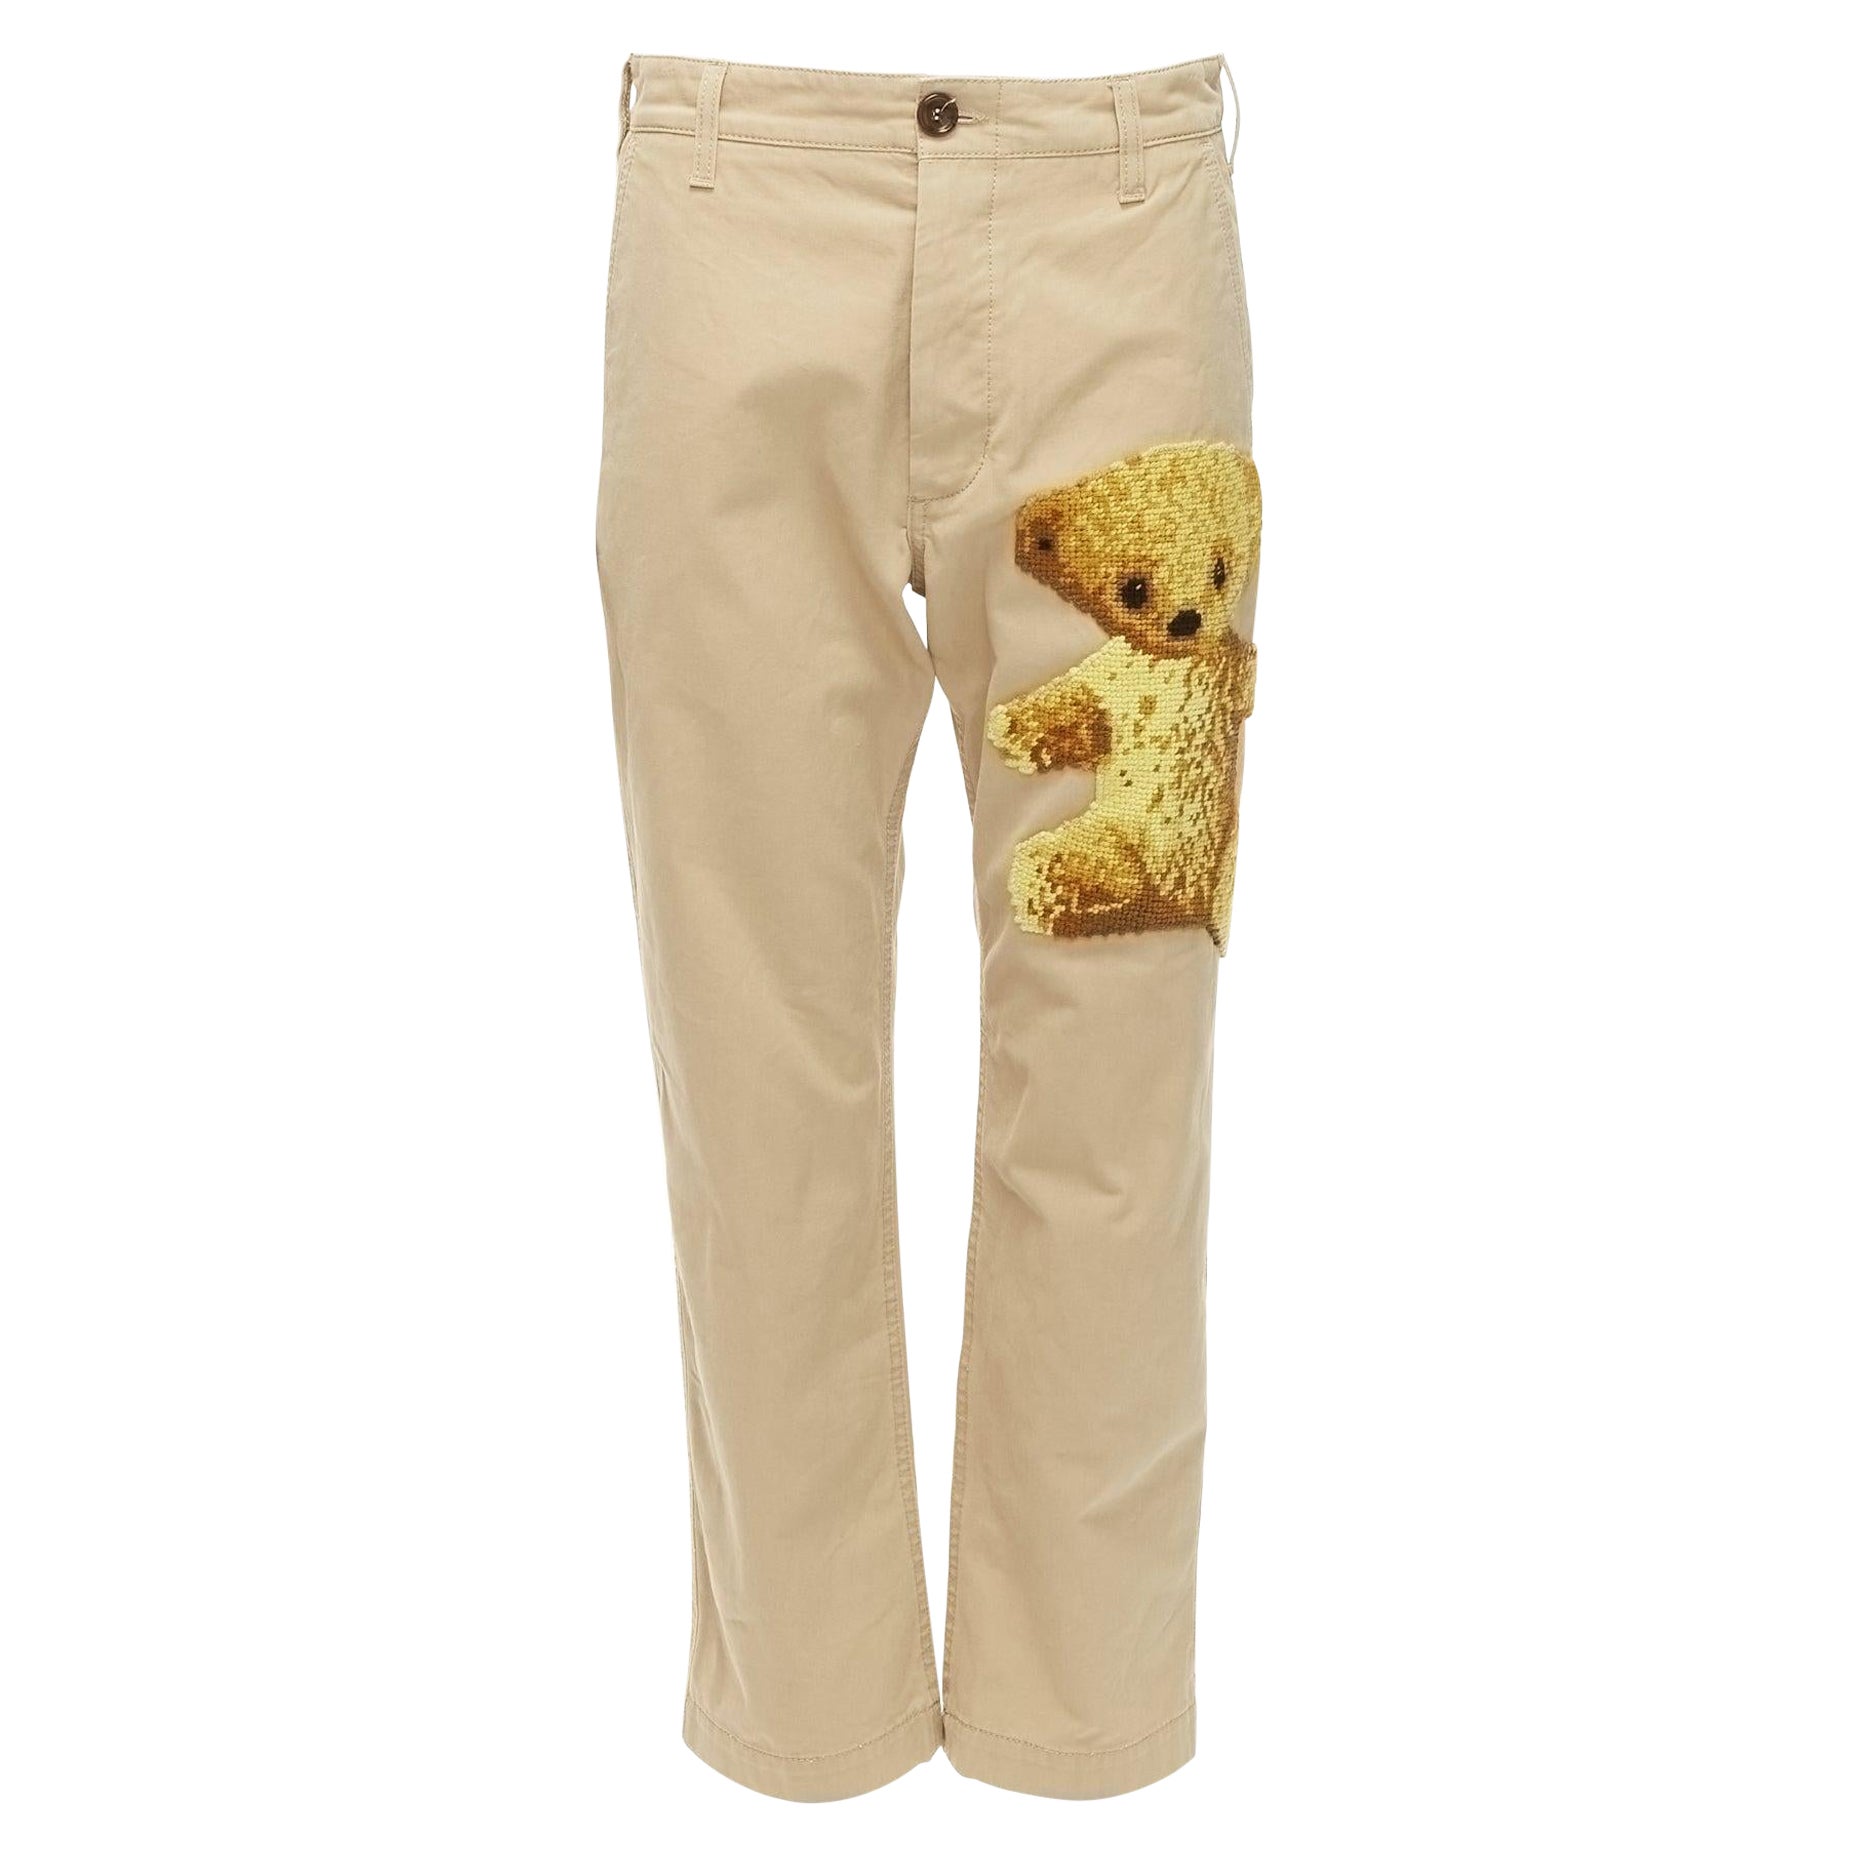 GUCCI Alessandro Michele brown Teddy Bear embroidery beige chino pants 30" For Sale